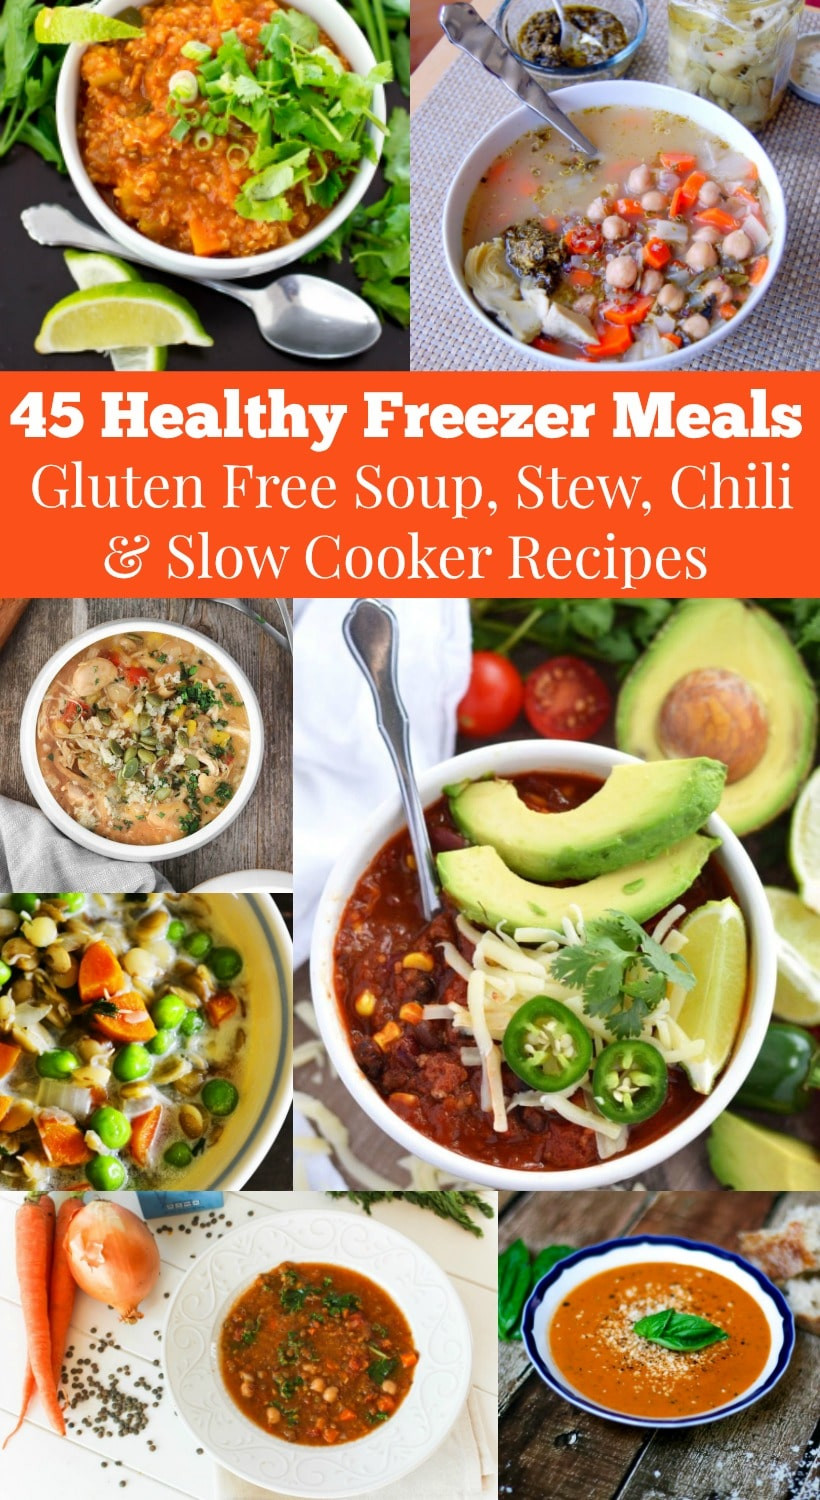 Gluten Free Entree Recipes
 45 Healthy Freezer Meals to Help You Reclaim Dinner Time